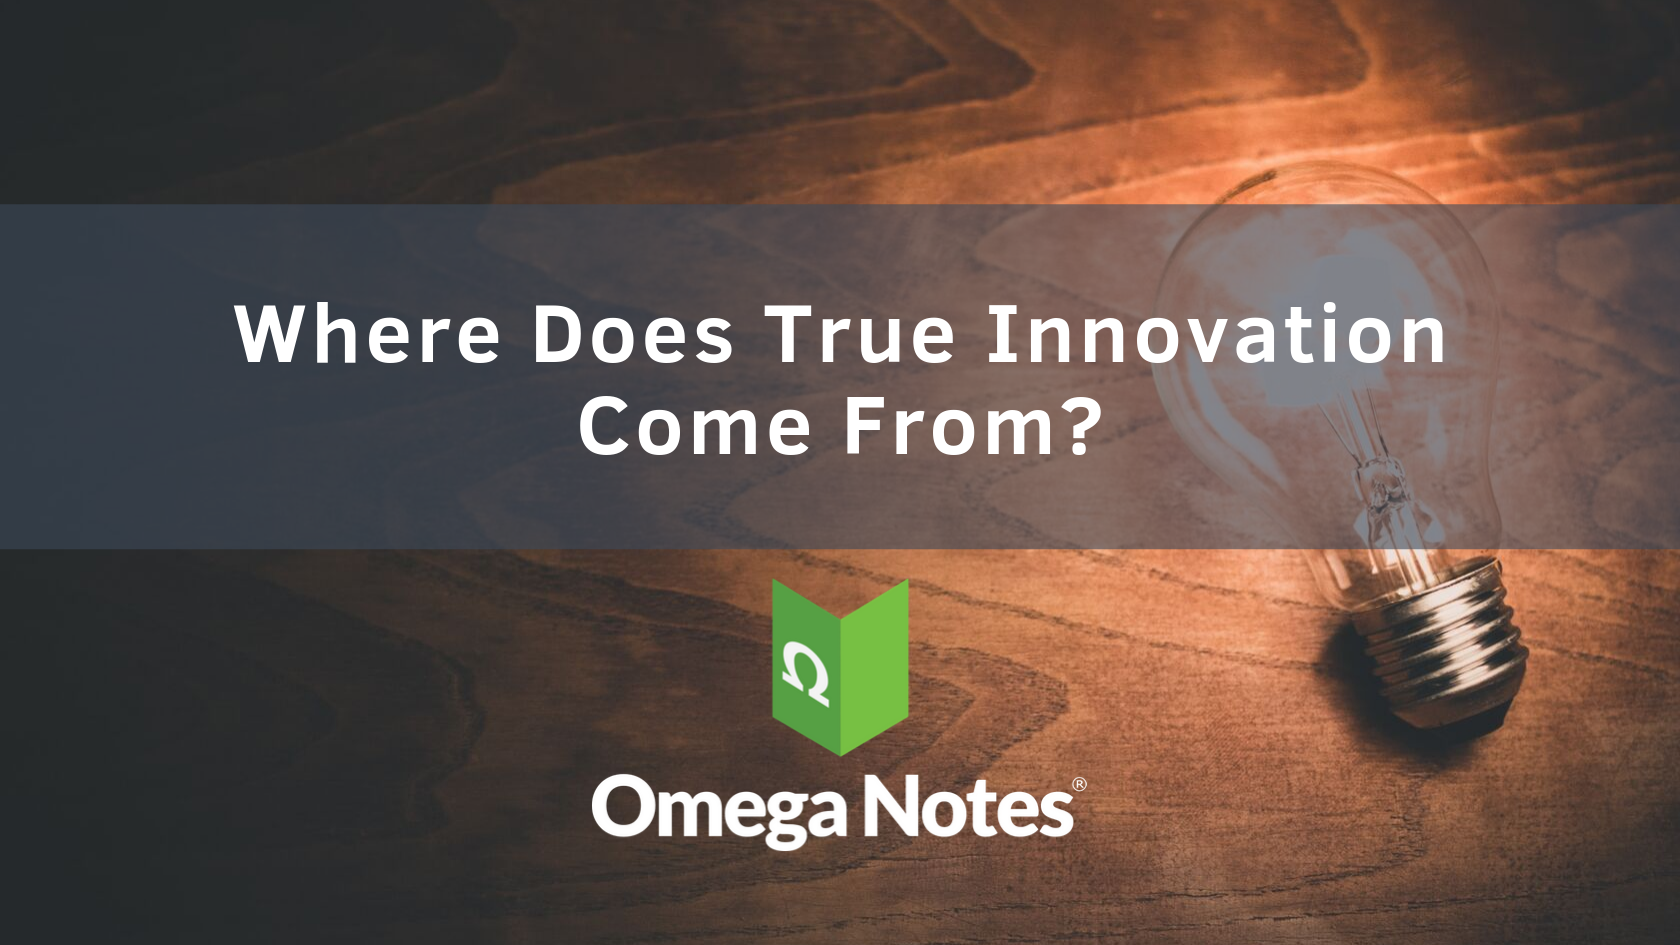 Where Does True Innovation Come From